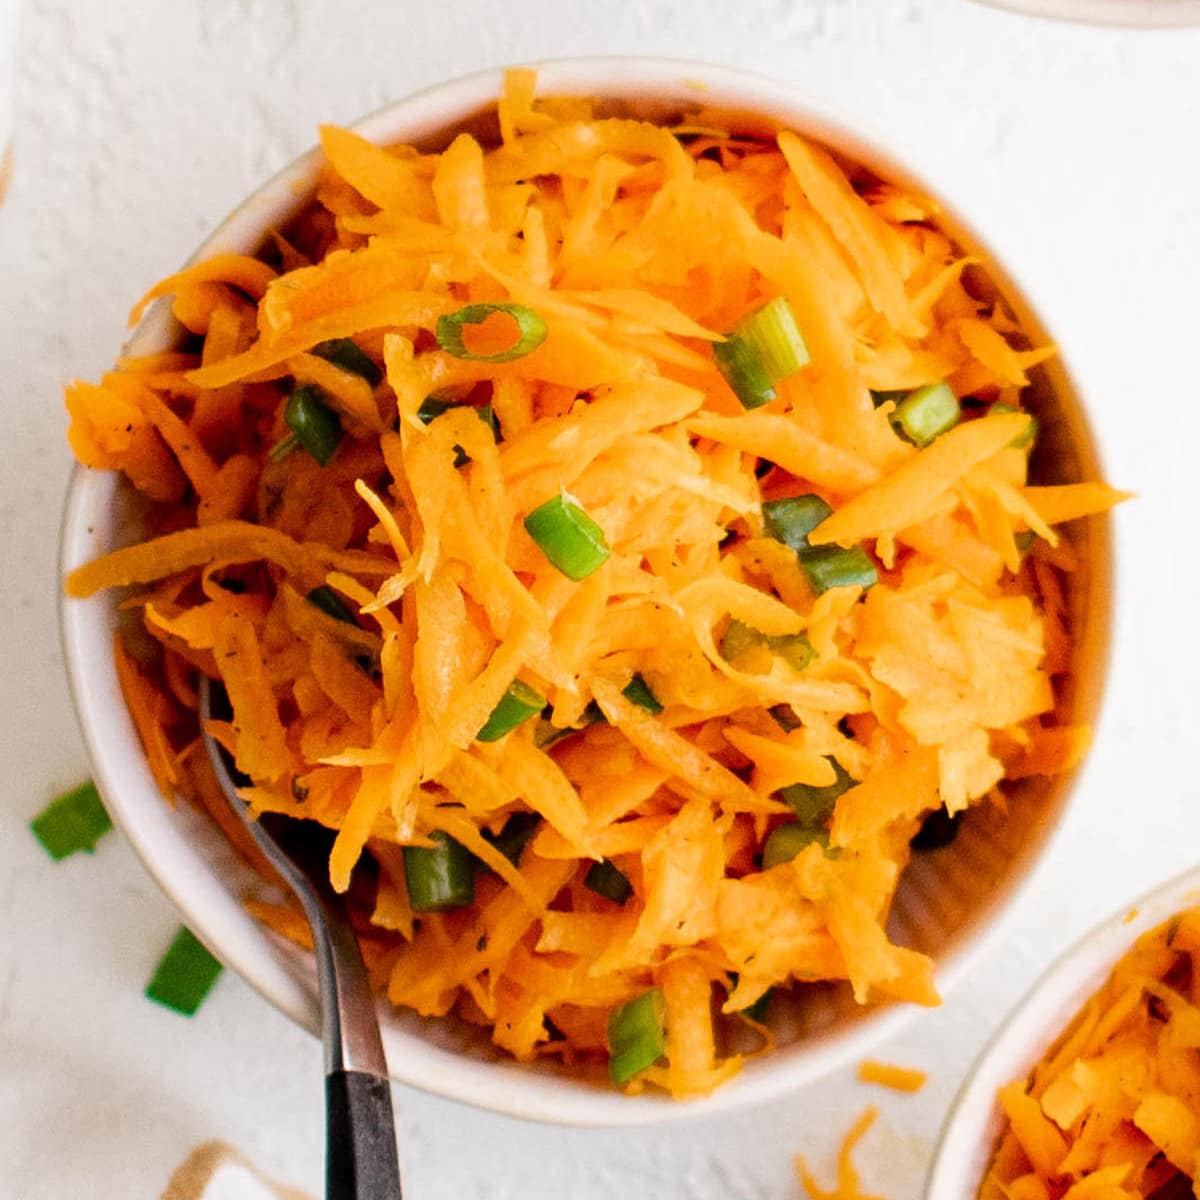 Carrot salad in a bowl.